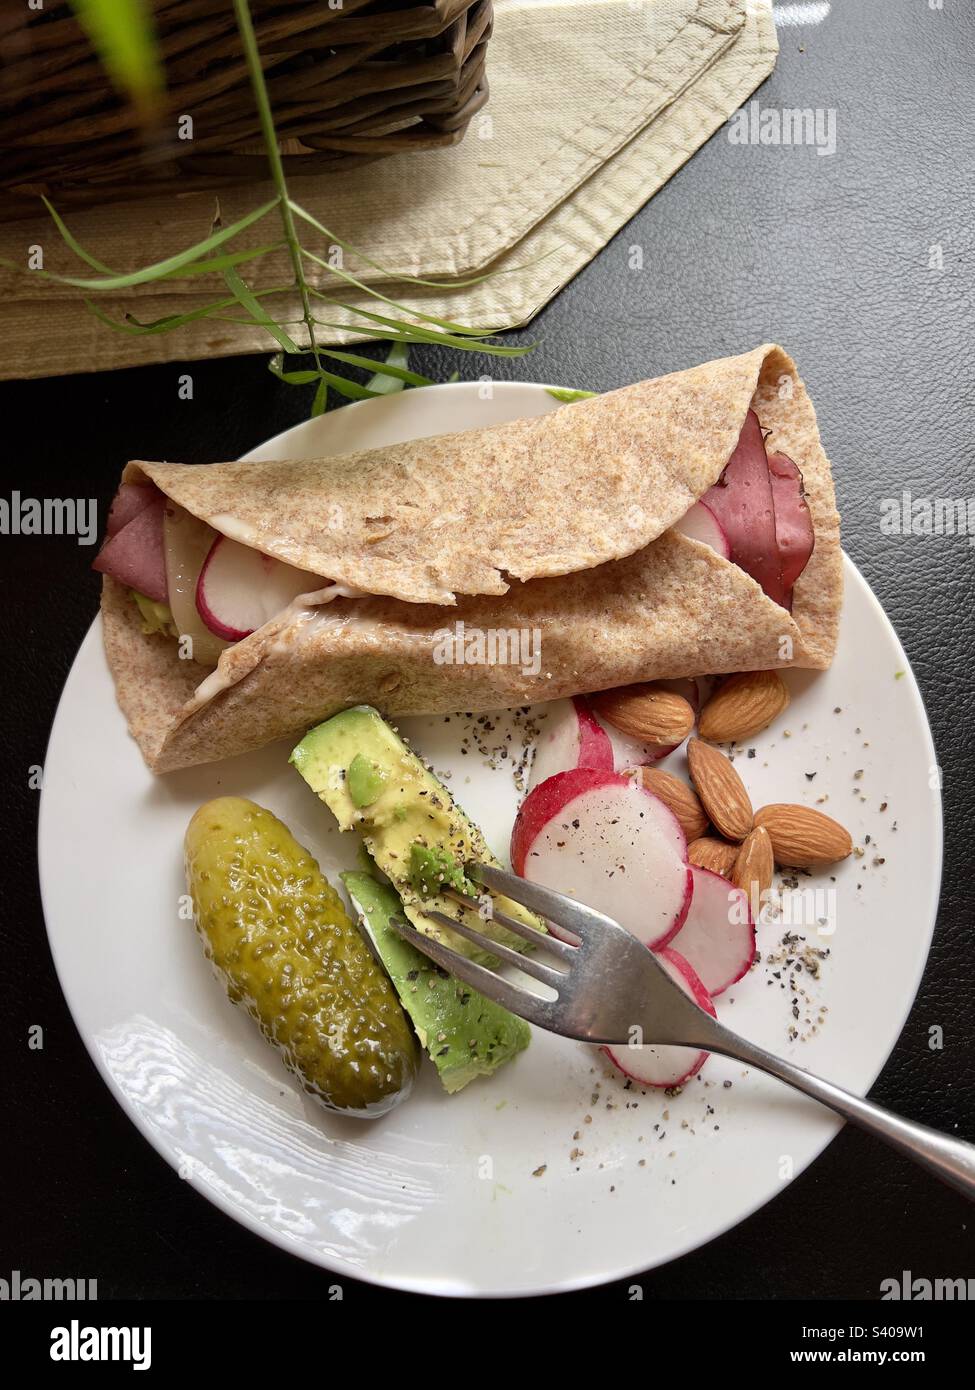 Eating healthier with the Mediterranean diet. Wheat tortilla wrap with lunch meat, avocados, and Swiss cheese. Served with h almonds, radish, pickle and a slice of fresh avocado. Stock Photo